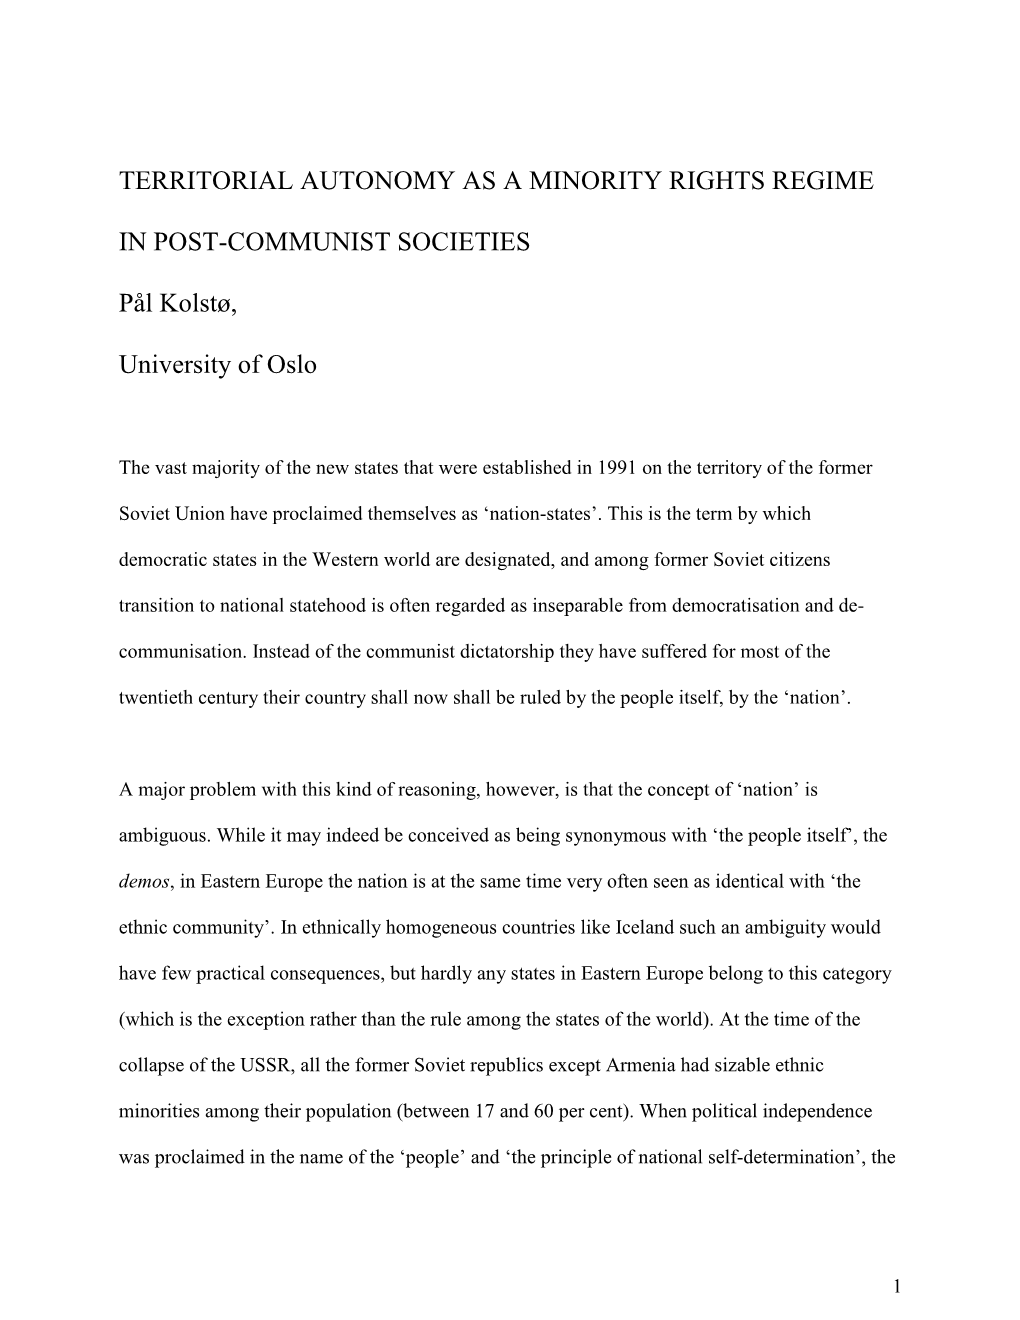 Territorial Autonomy As a Minority Rights Regime In